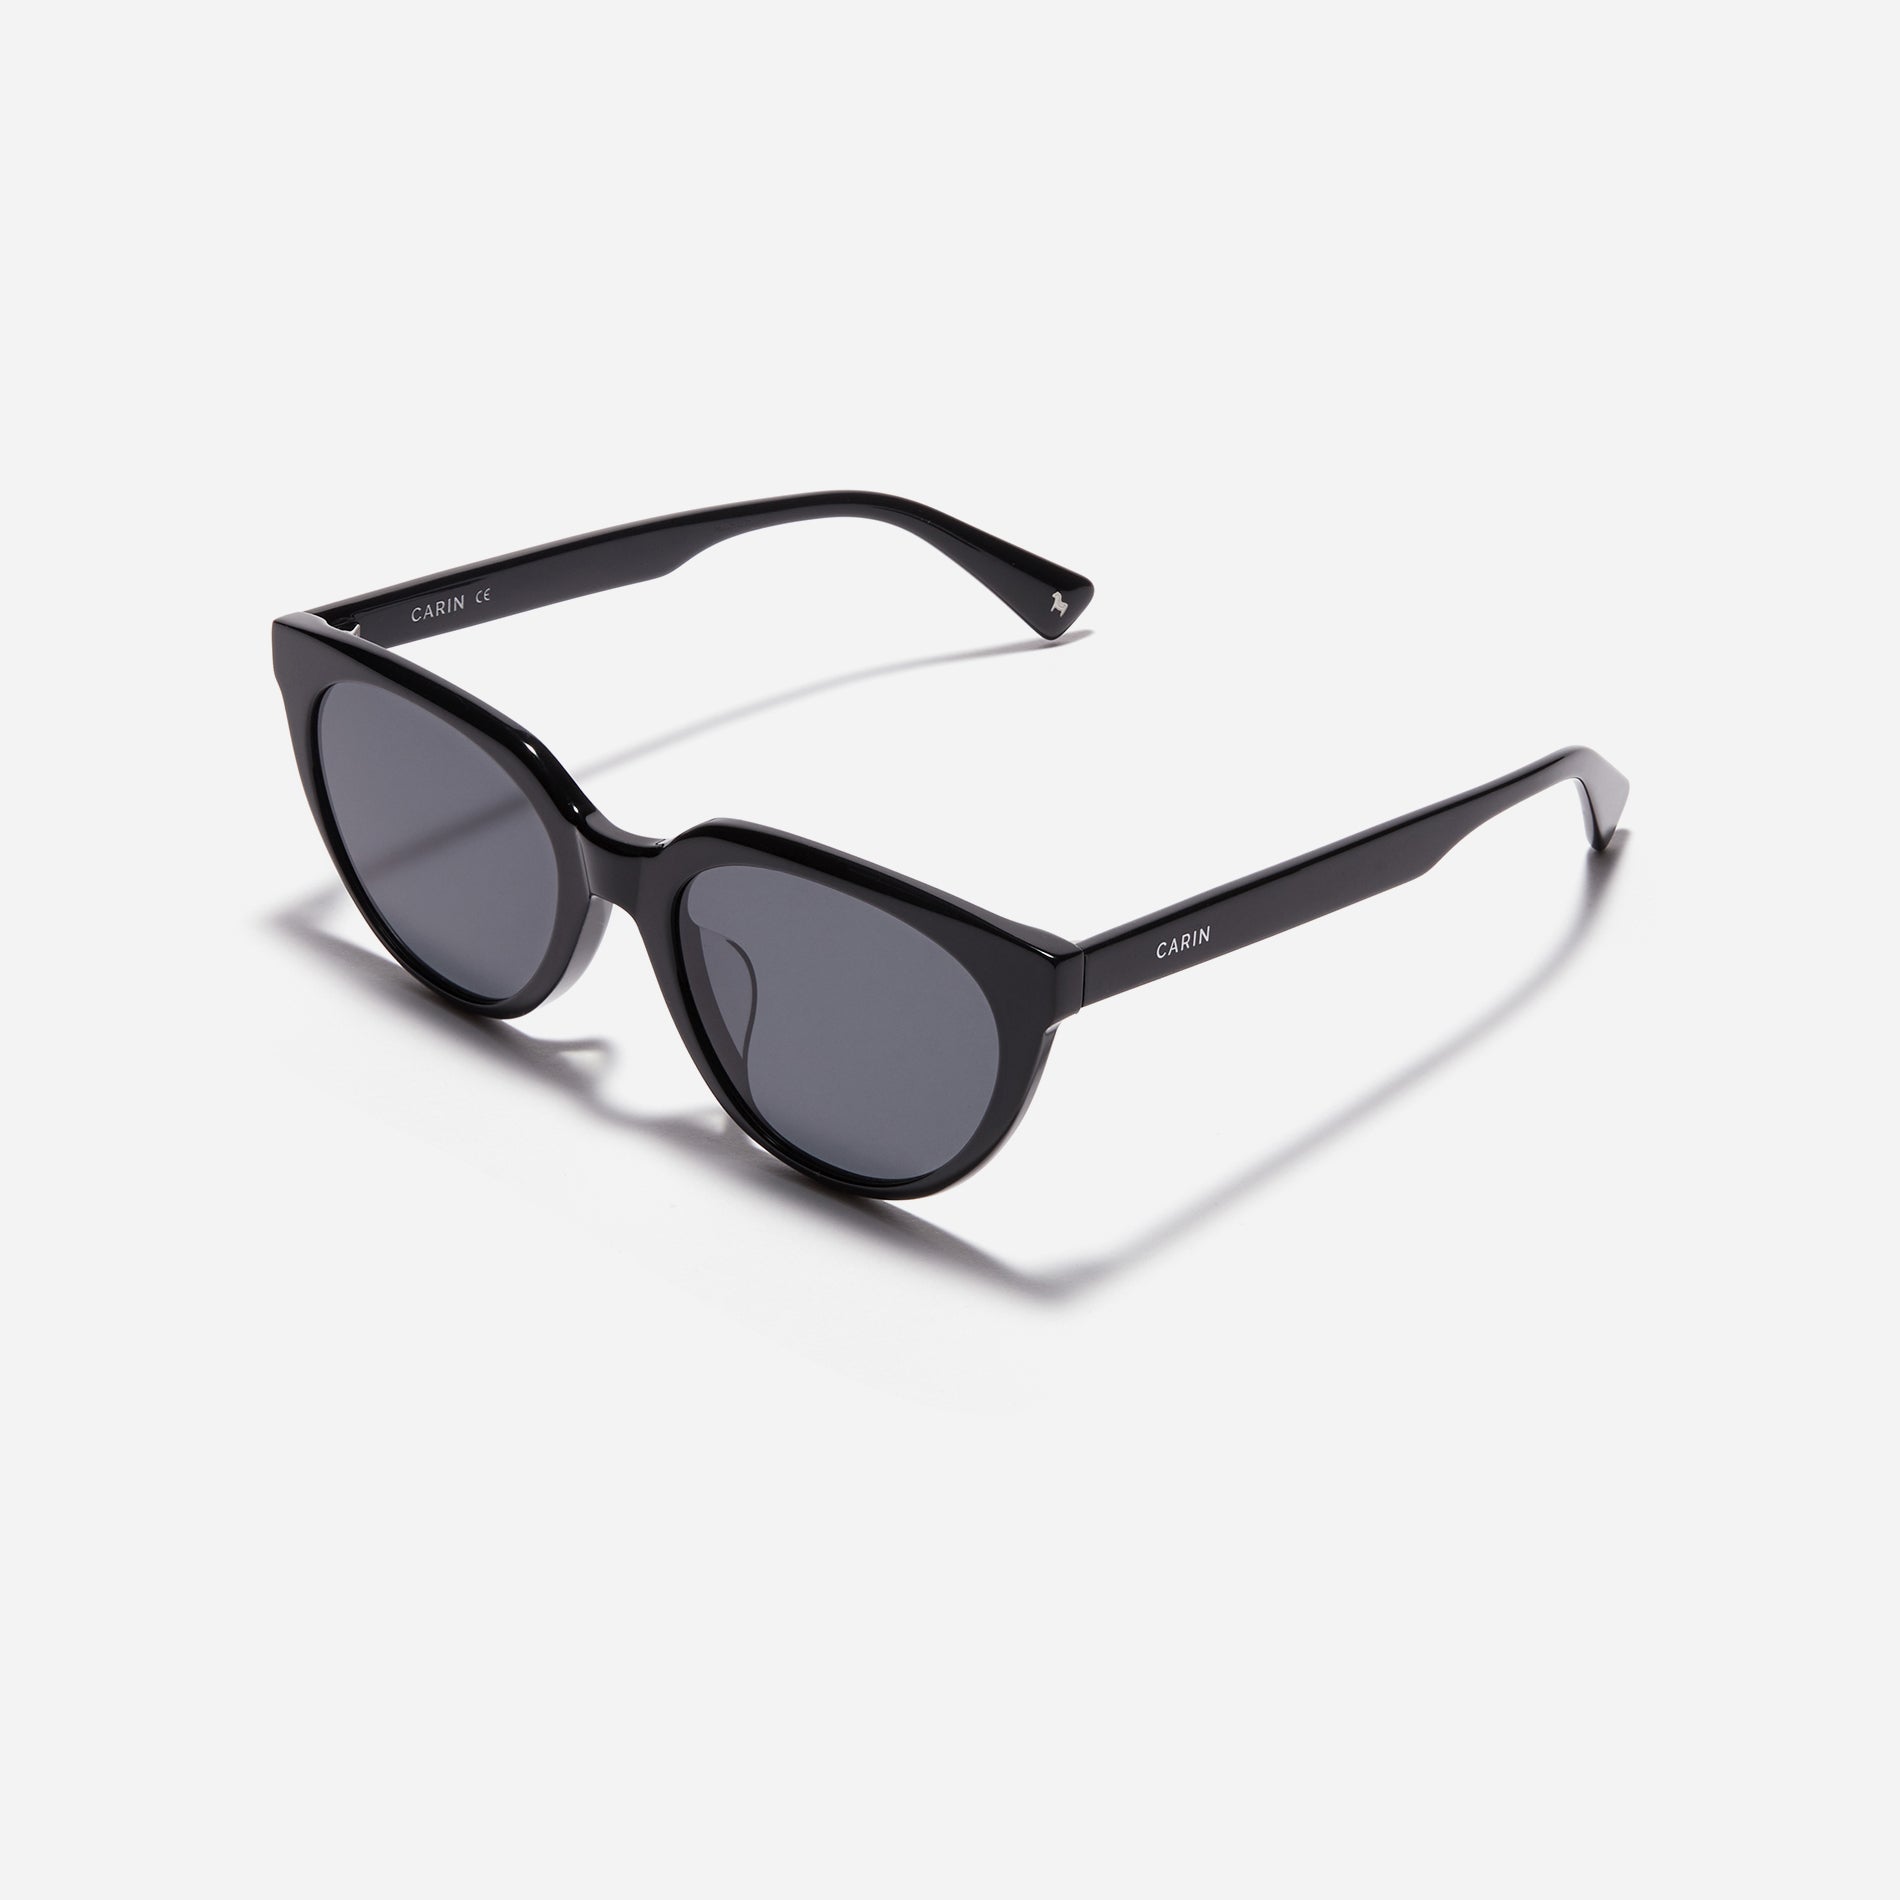 Chic cat-eye sunglasses. Featuring smooth curves on the upper surface, these sunglasses offer enhanced comfort with their lightweight yet durable frame.